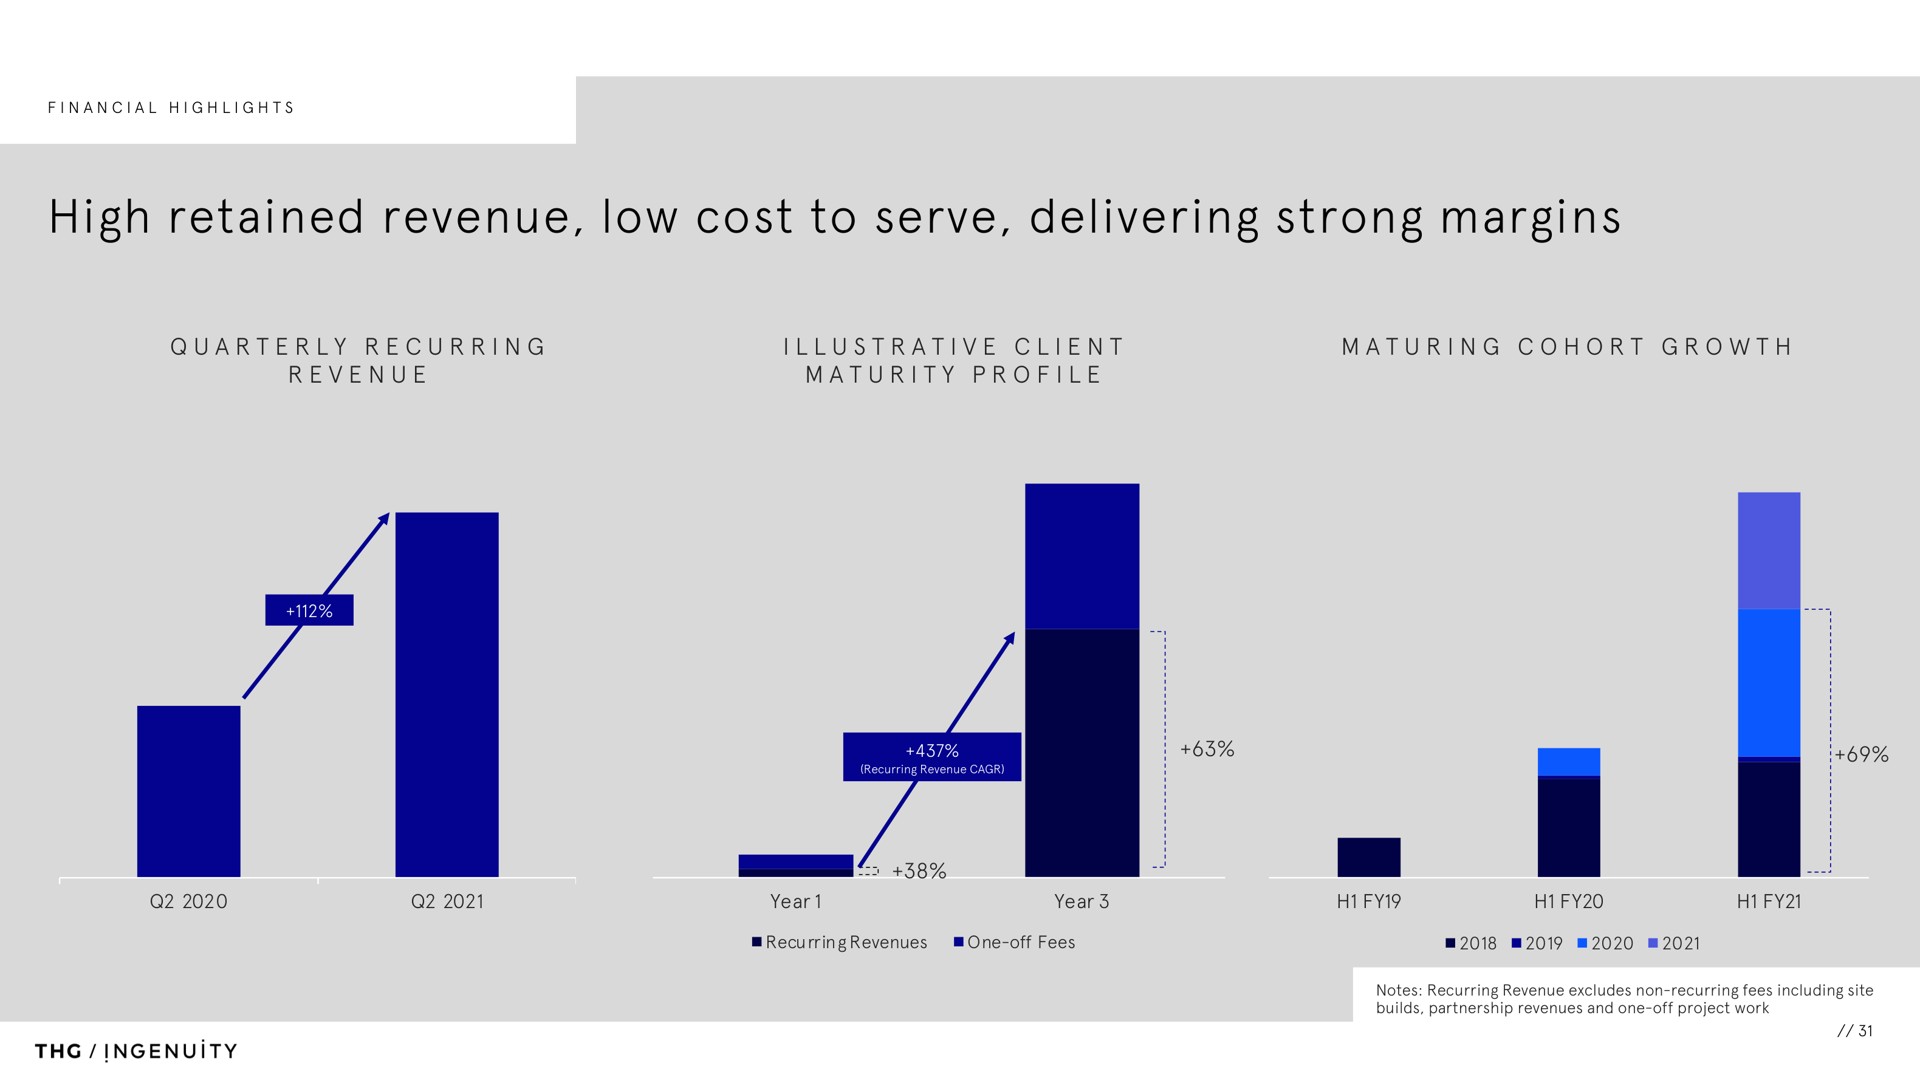 high retained revenue low cost to serve delivering strong margins a i i a i i a i i a i year year recurring revenues one off fees quarterly illustrative client maturity profile maturing cohort growth ingenuity | The Hut Group